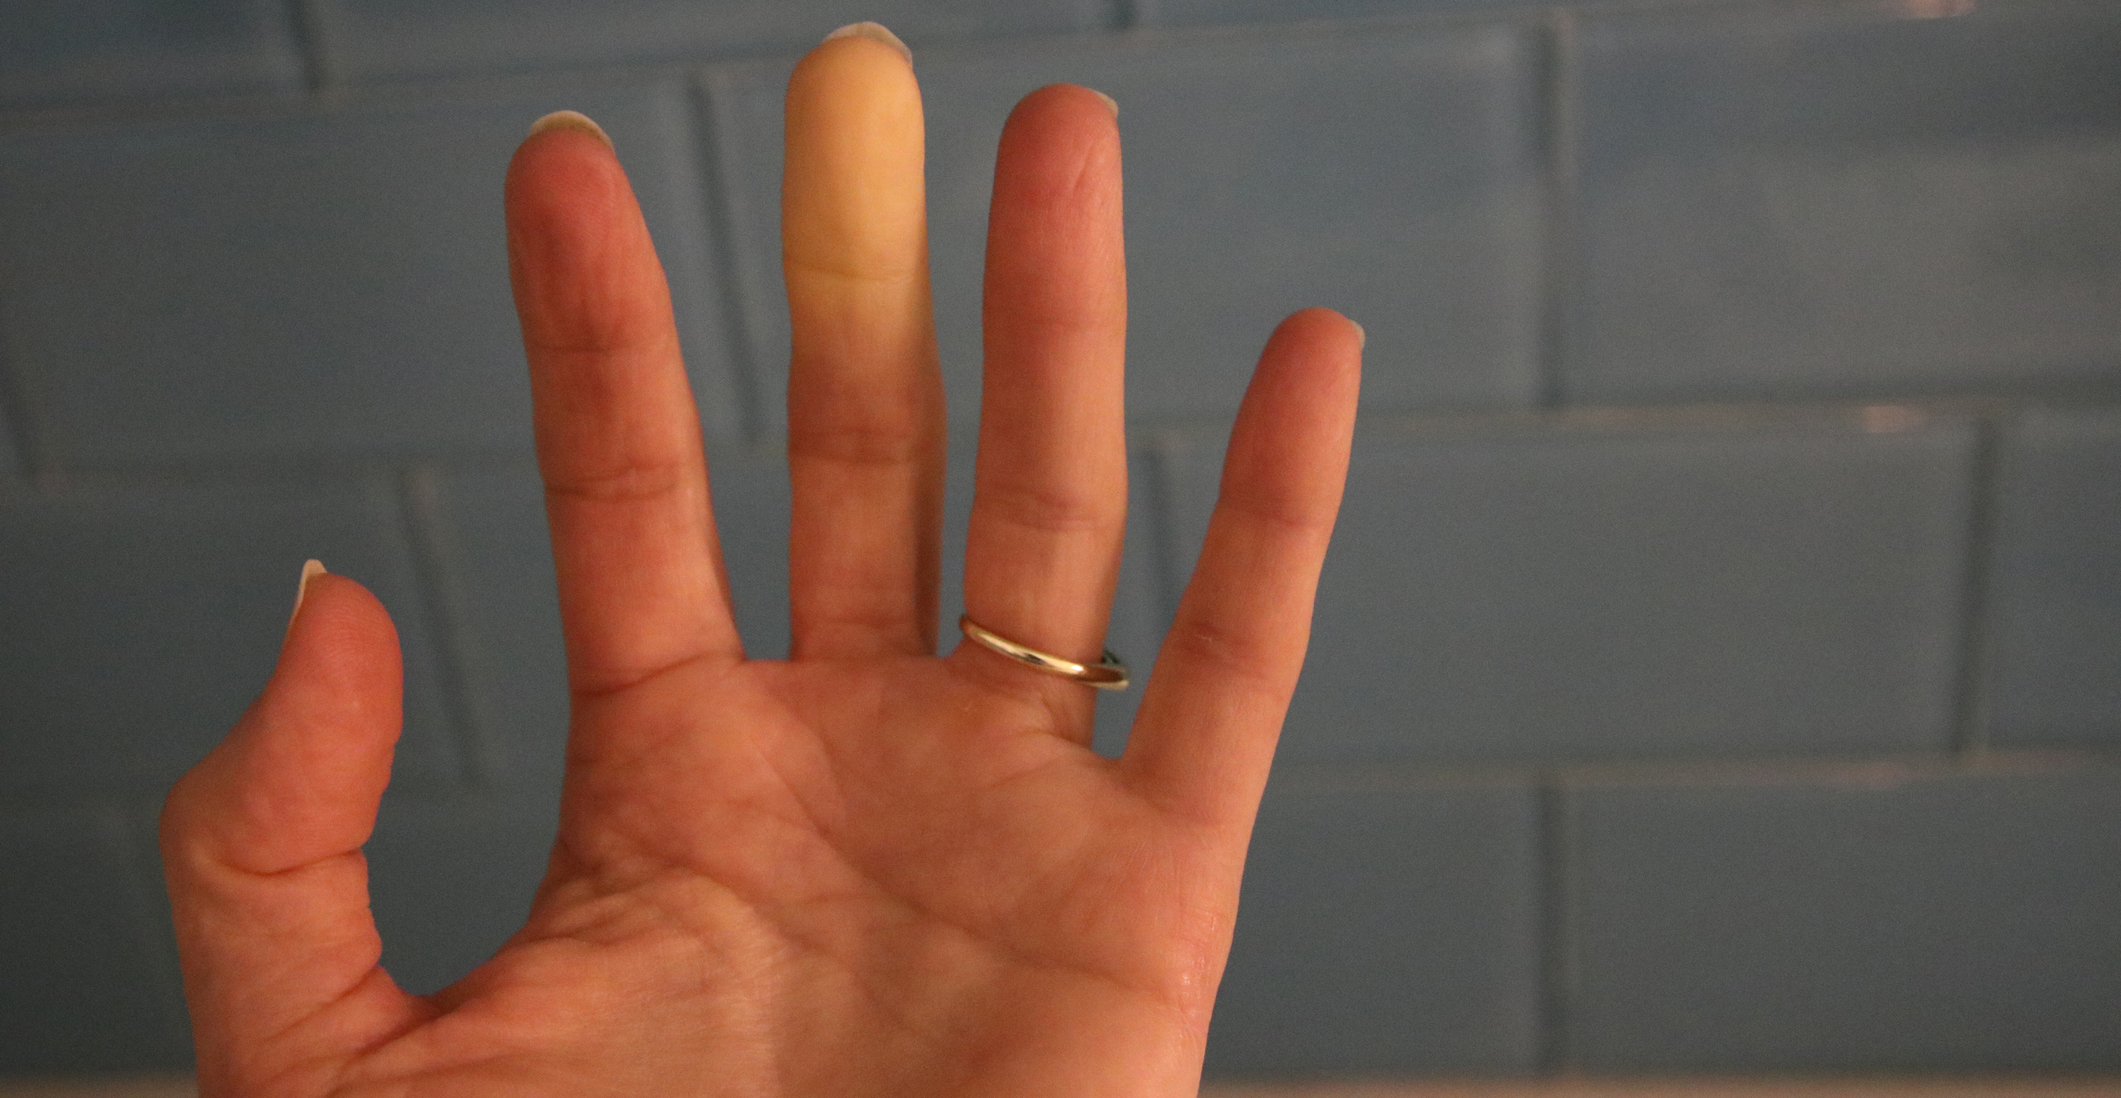 Finger Injury - No Pain but Swollen Knuckle and Restricted Range of Motion